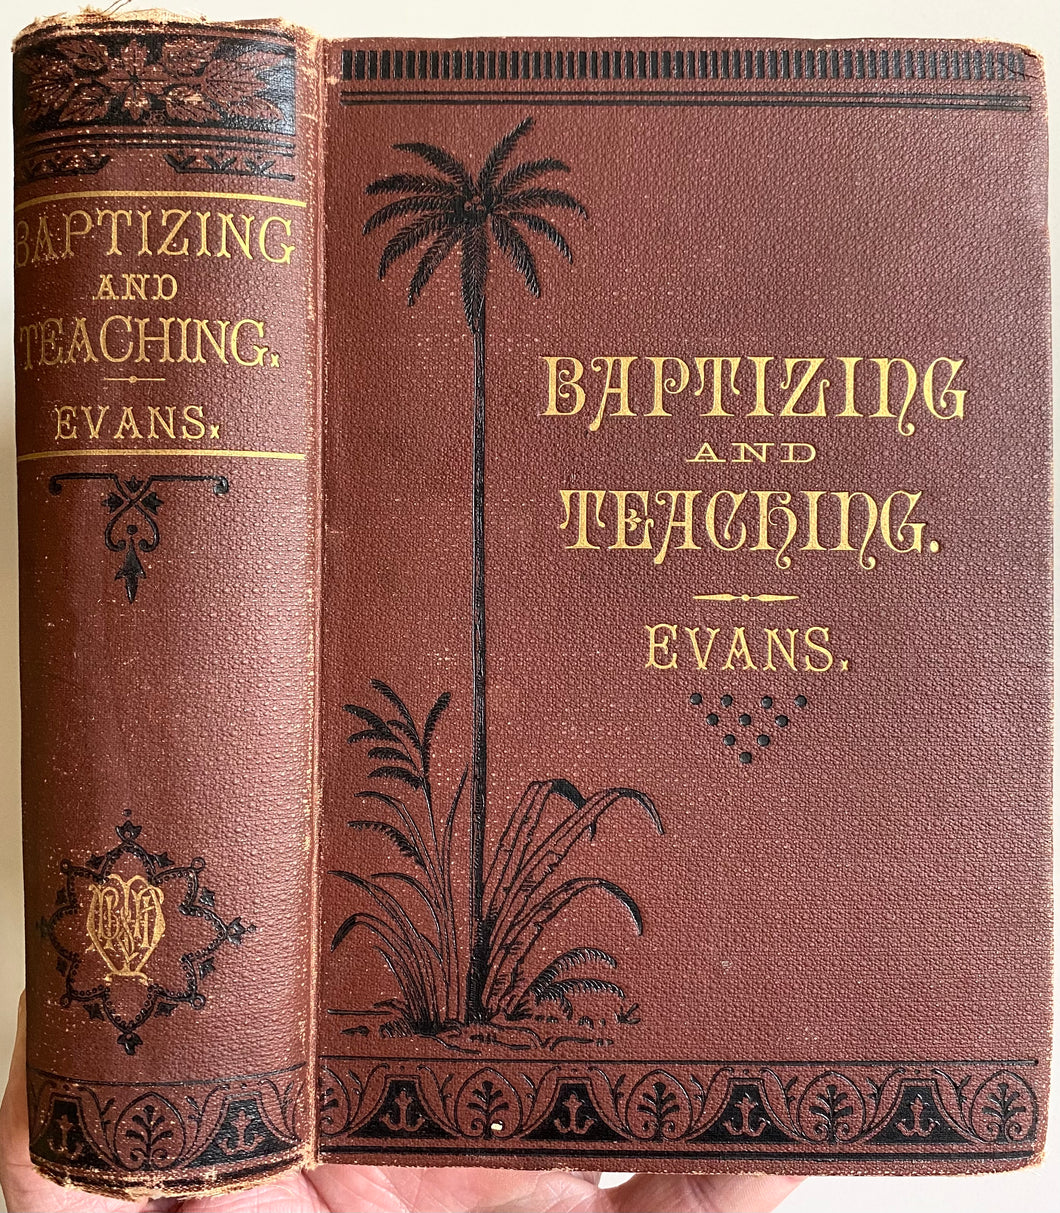 1887 J. S. EVANS. Very Rare Dual-Covenant Work on God's Relationship to Jews & Gentiles